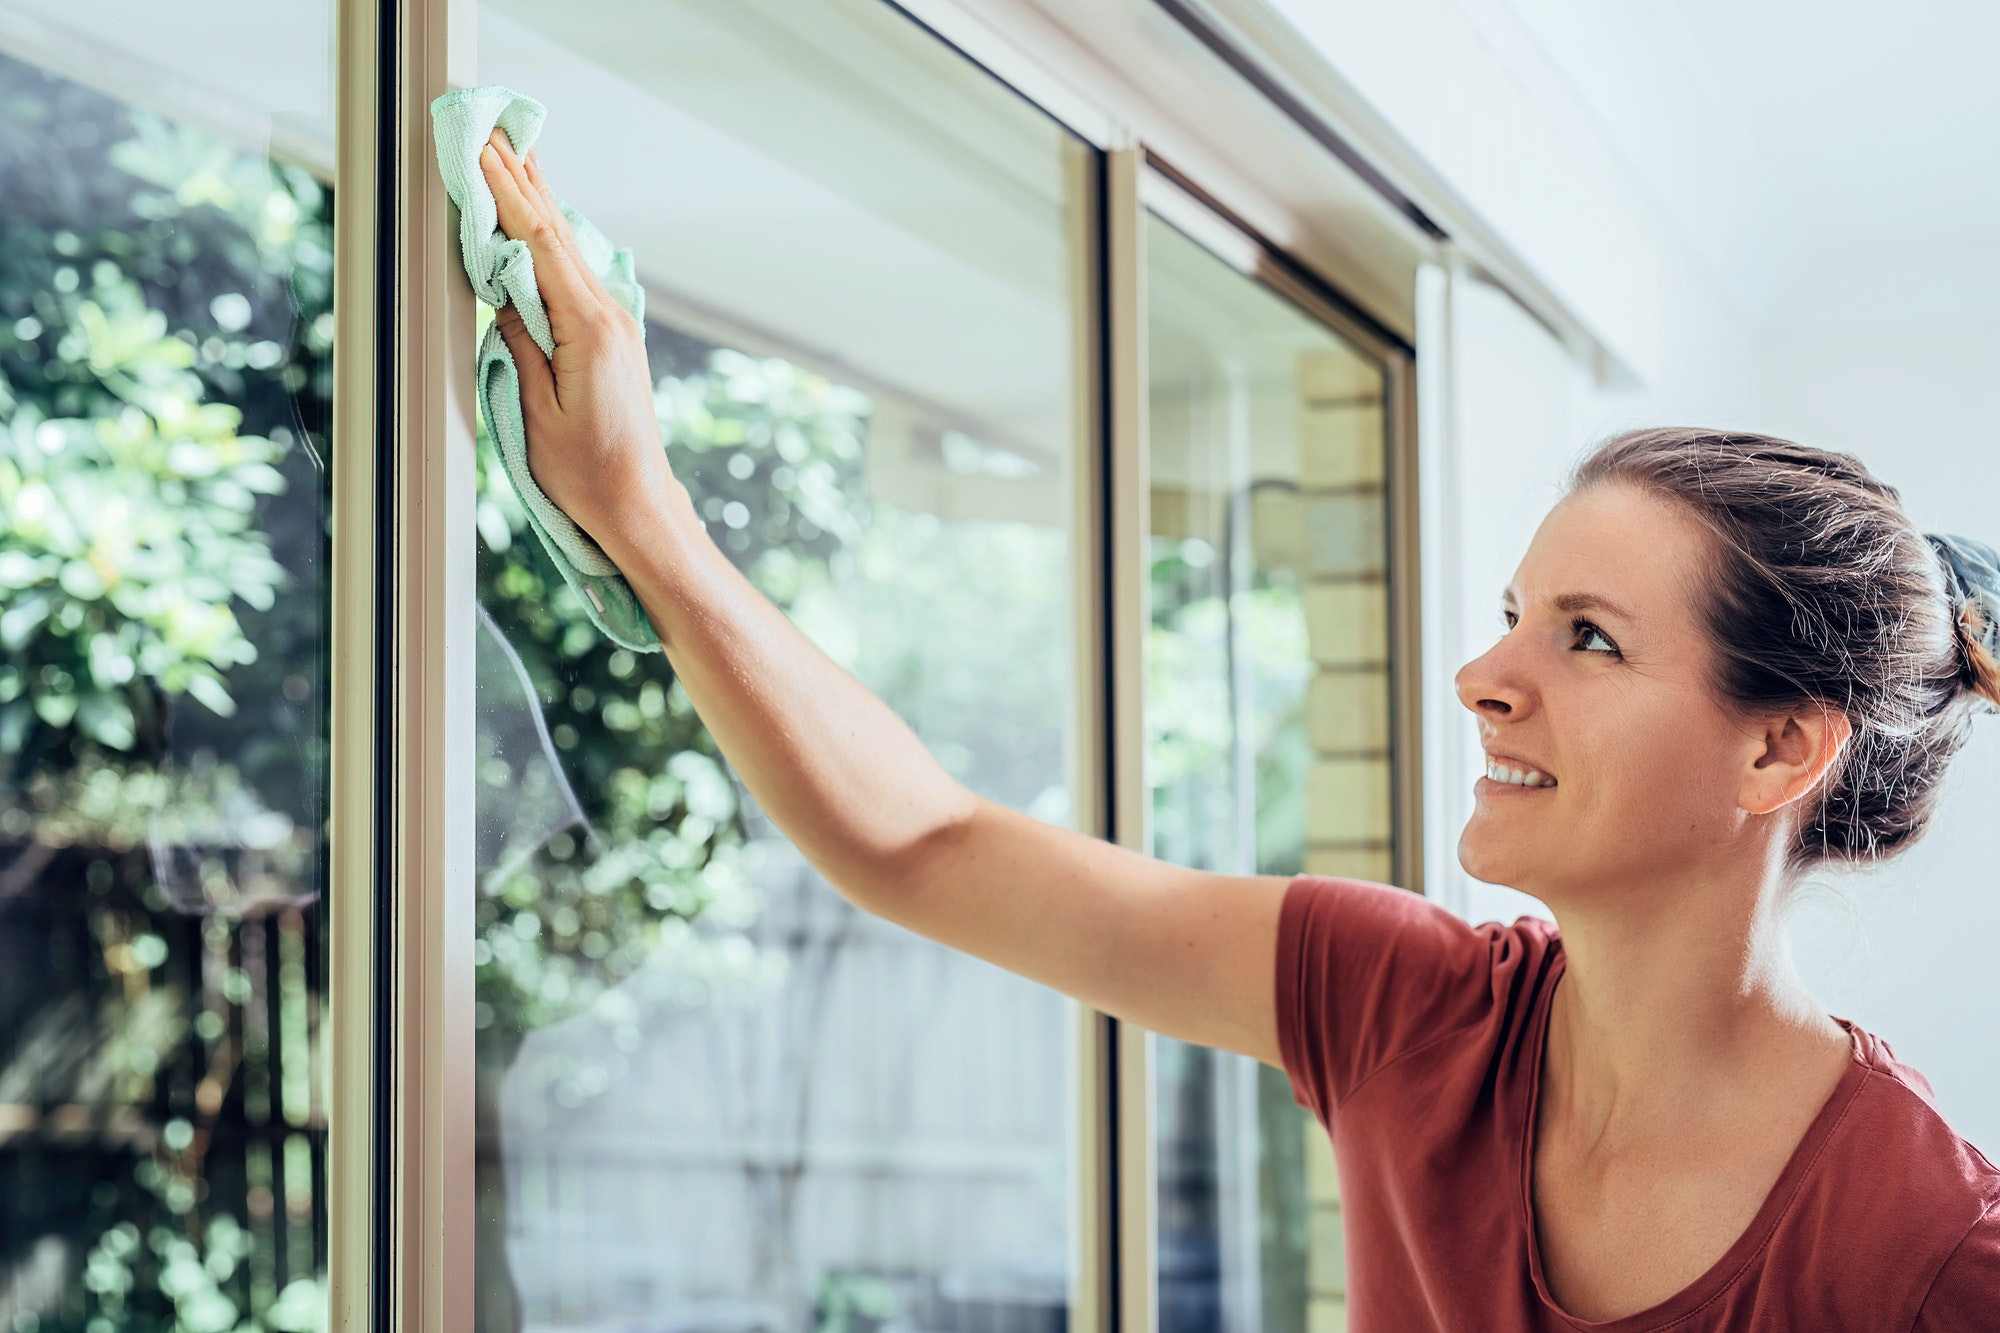 Young smiling woman is cleaning windows in a house, doing chores